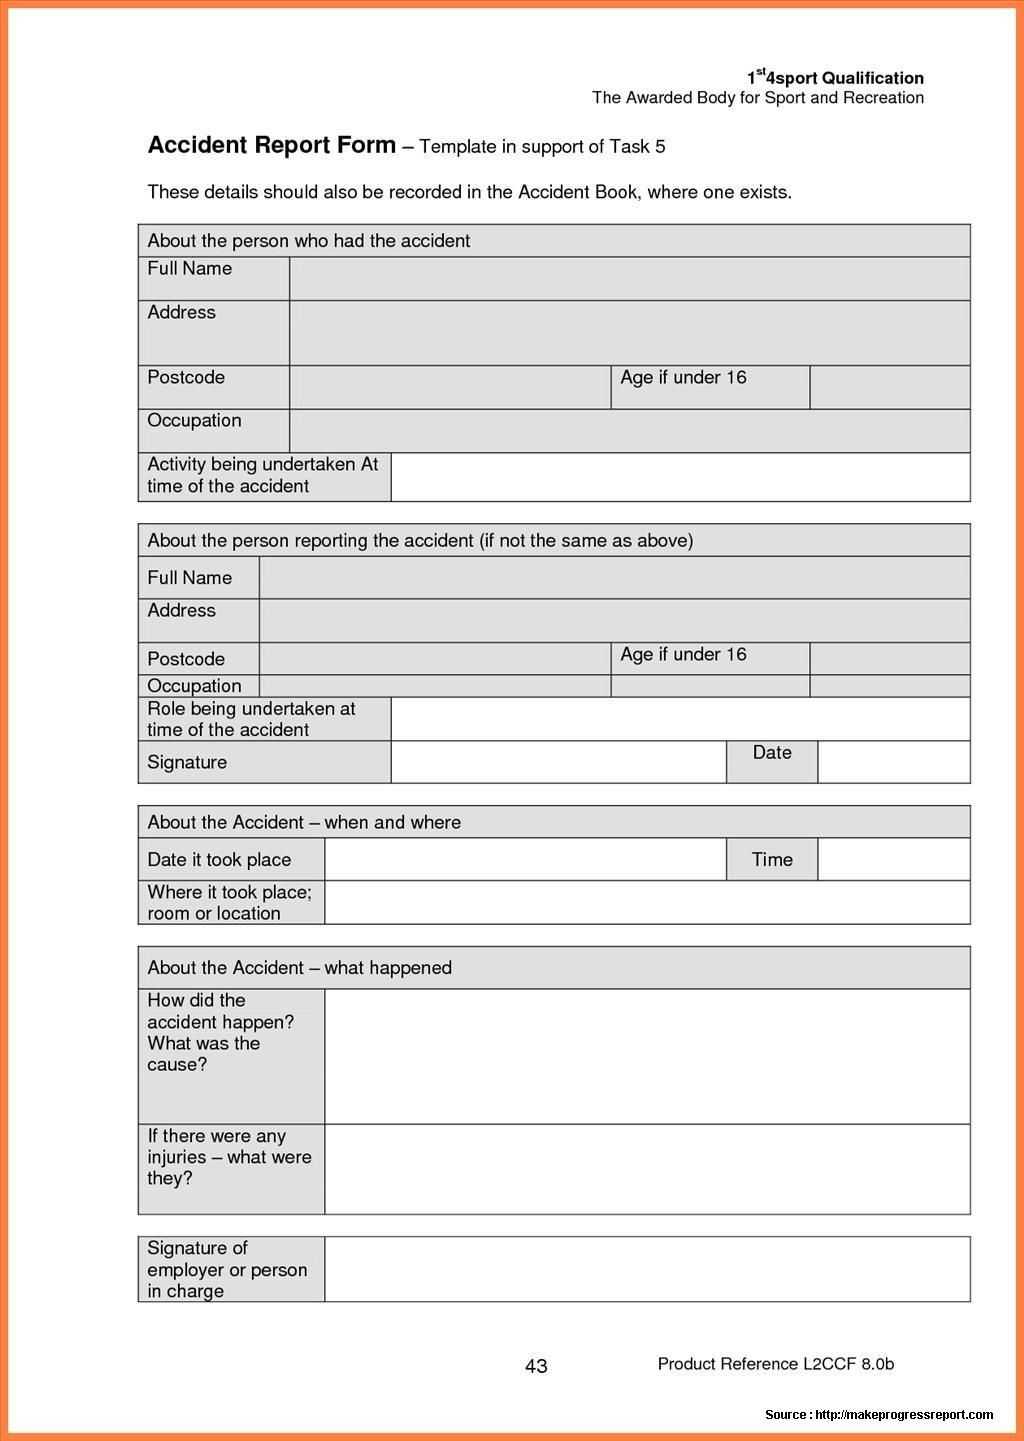 Construction Accident Report Form Sample | Incident Report Throughout Incident Report Template Itil